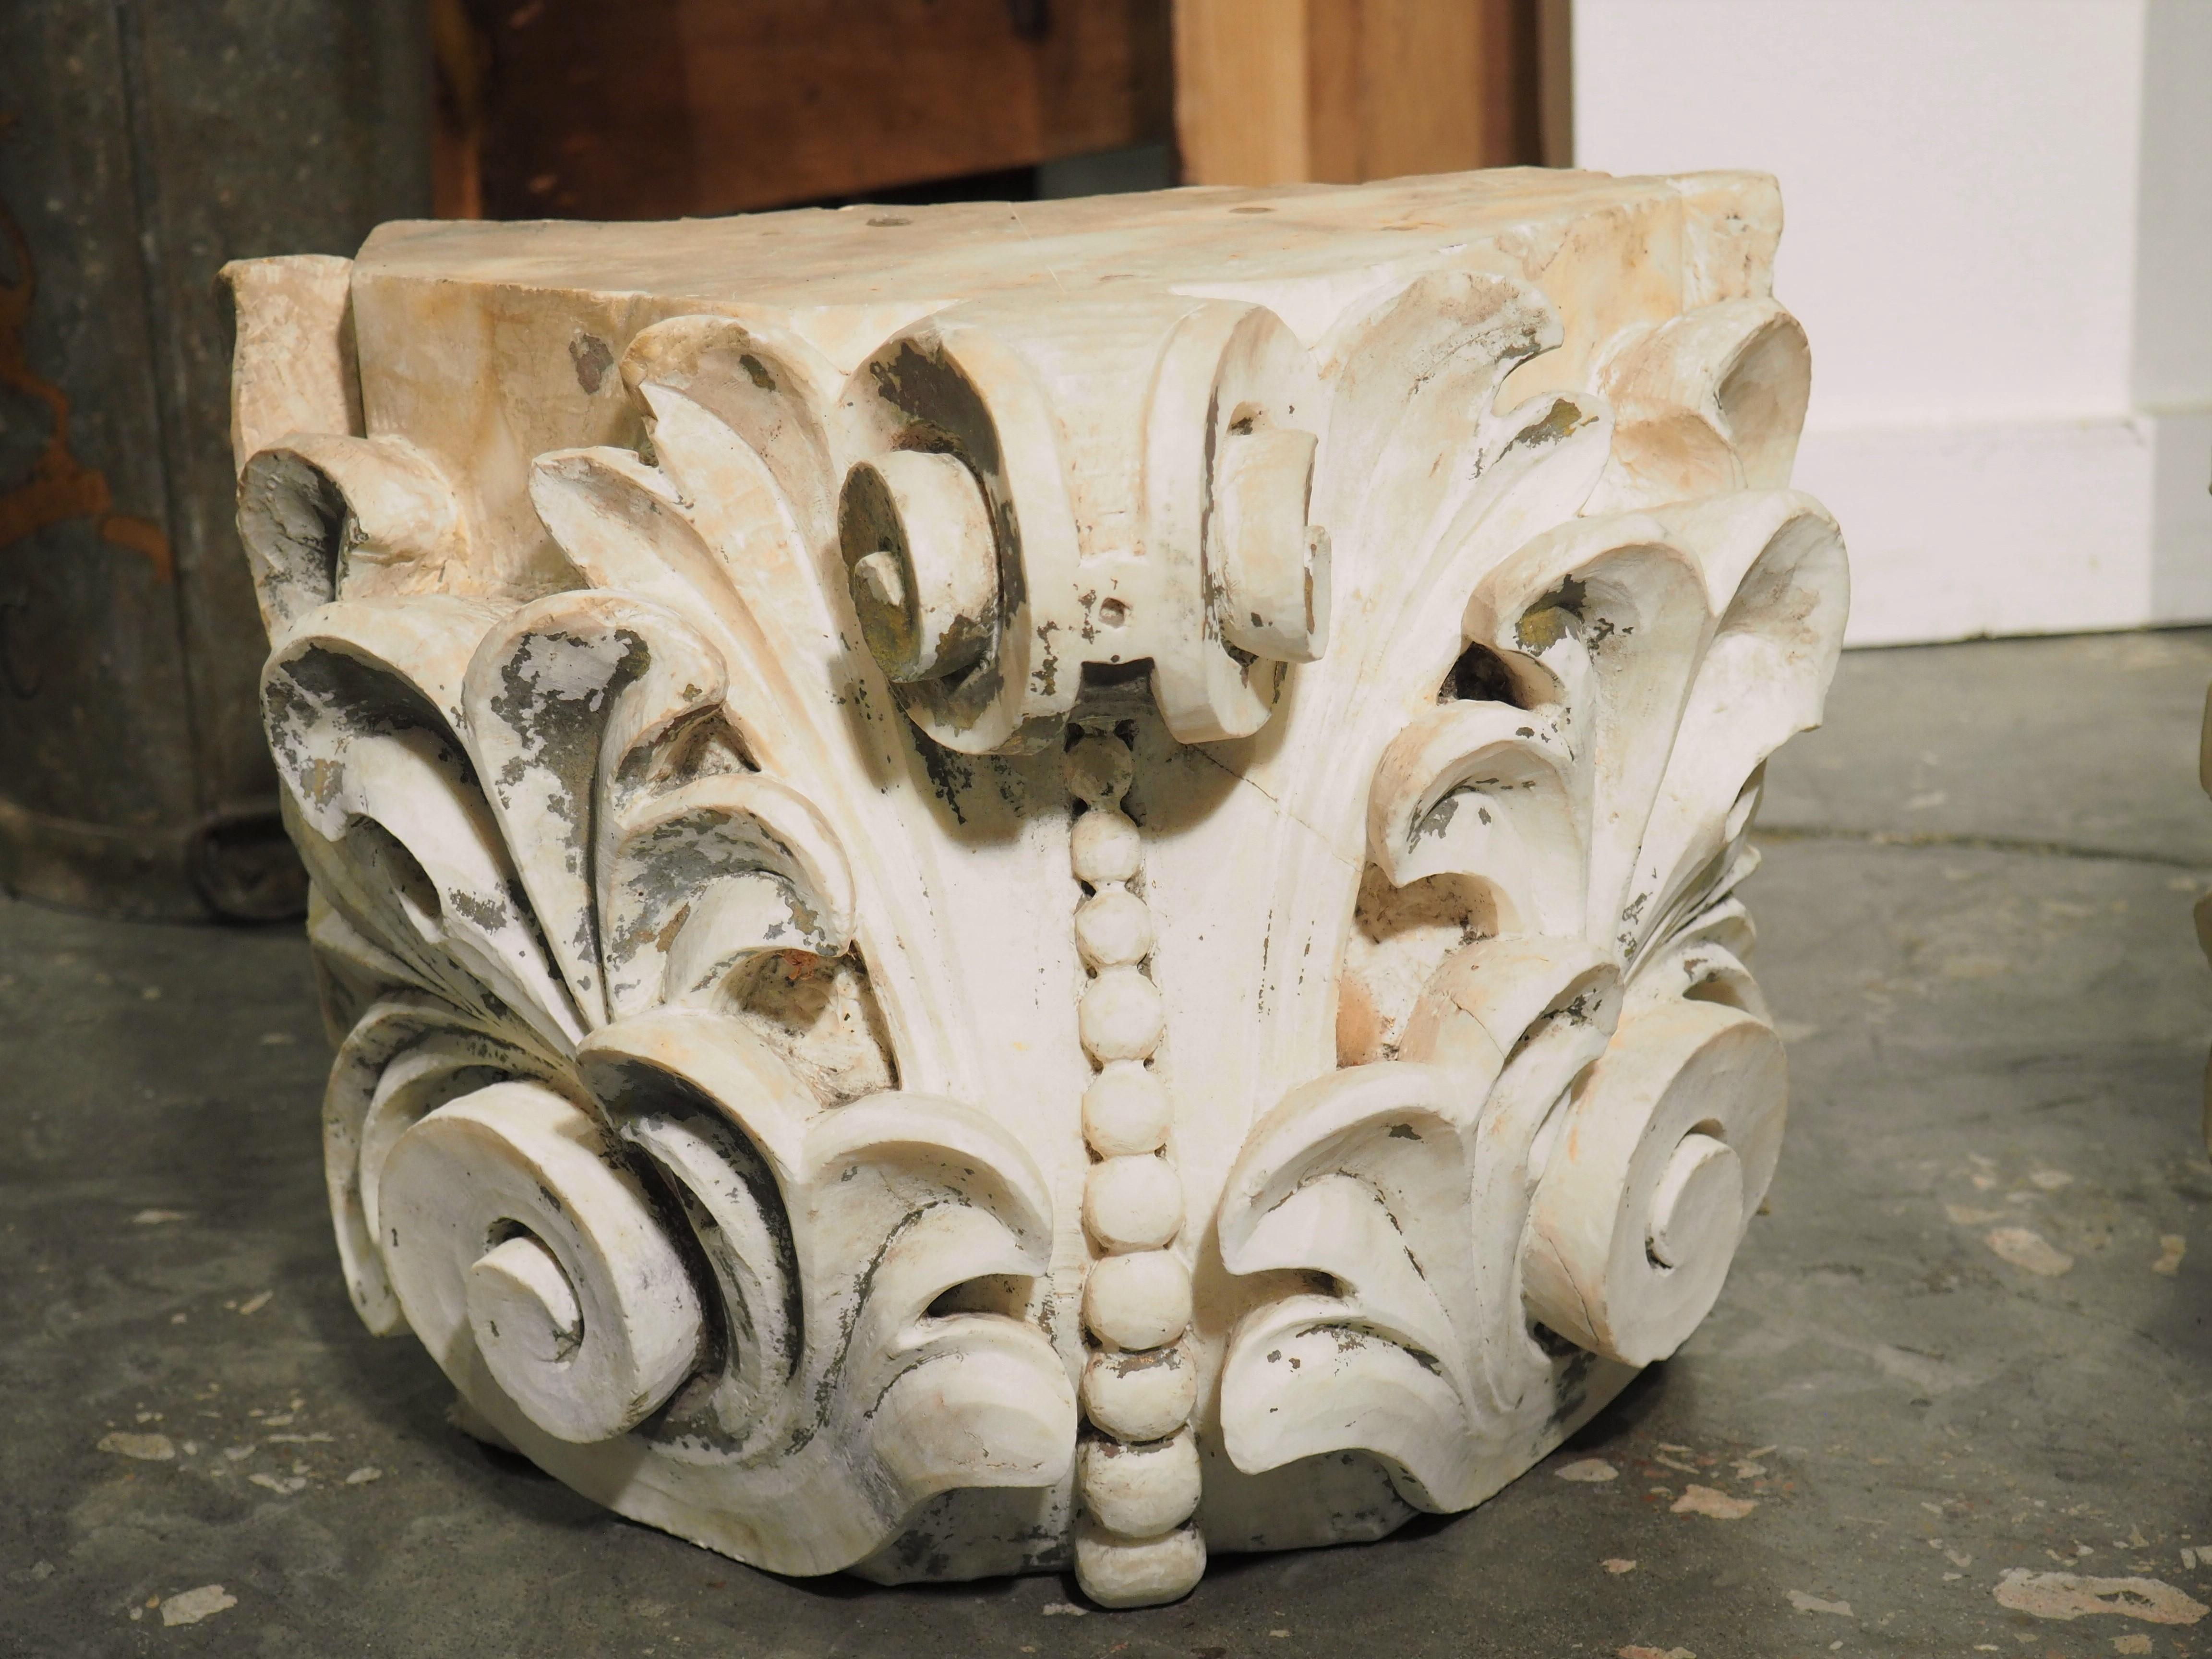 Hand-carved by a master Italian mason in the 1700’s, this pair of marble capitals has elegant foliate carvings along five sides. The tops and bottoms have been polished, giving them a bright sheen. Both back sides have been left natural, revealing